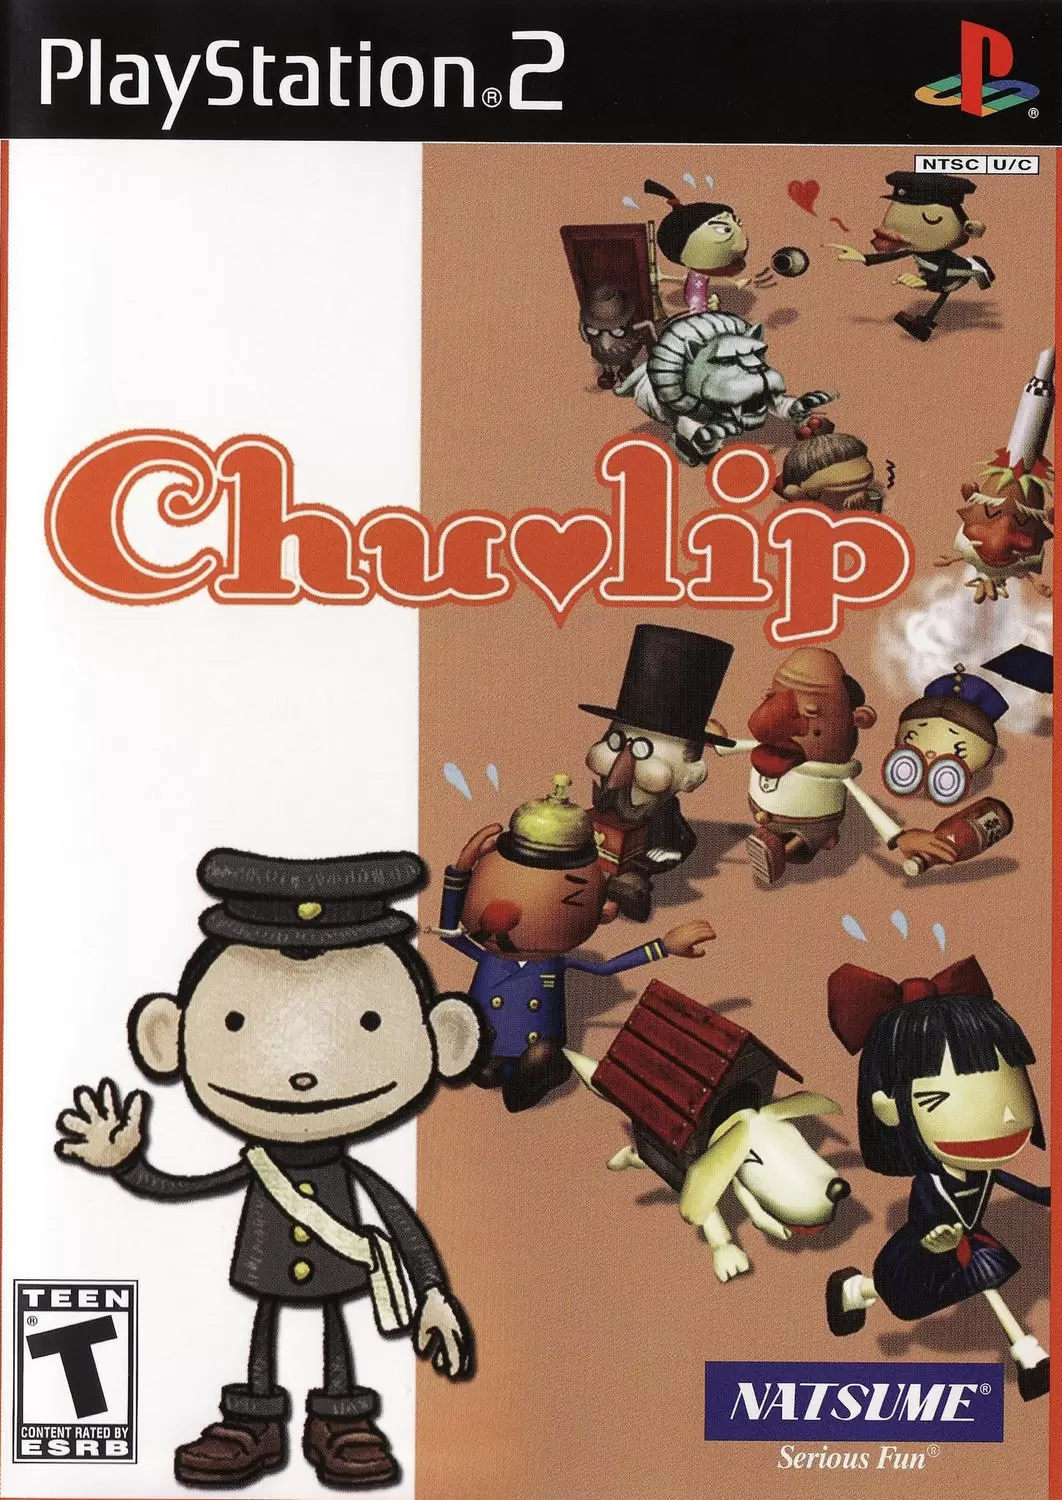 PS2 Games - Chulip